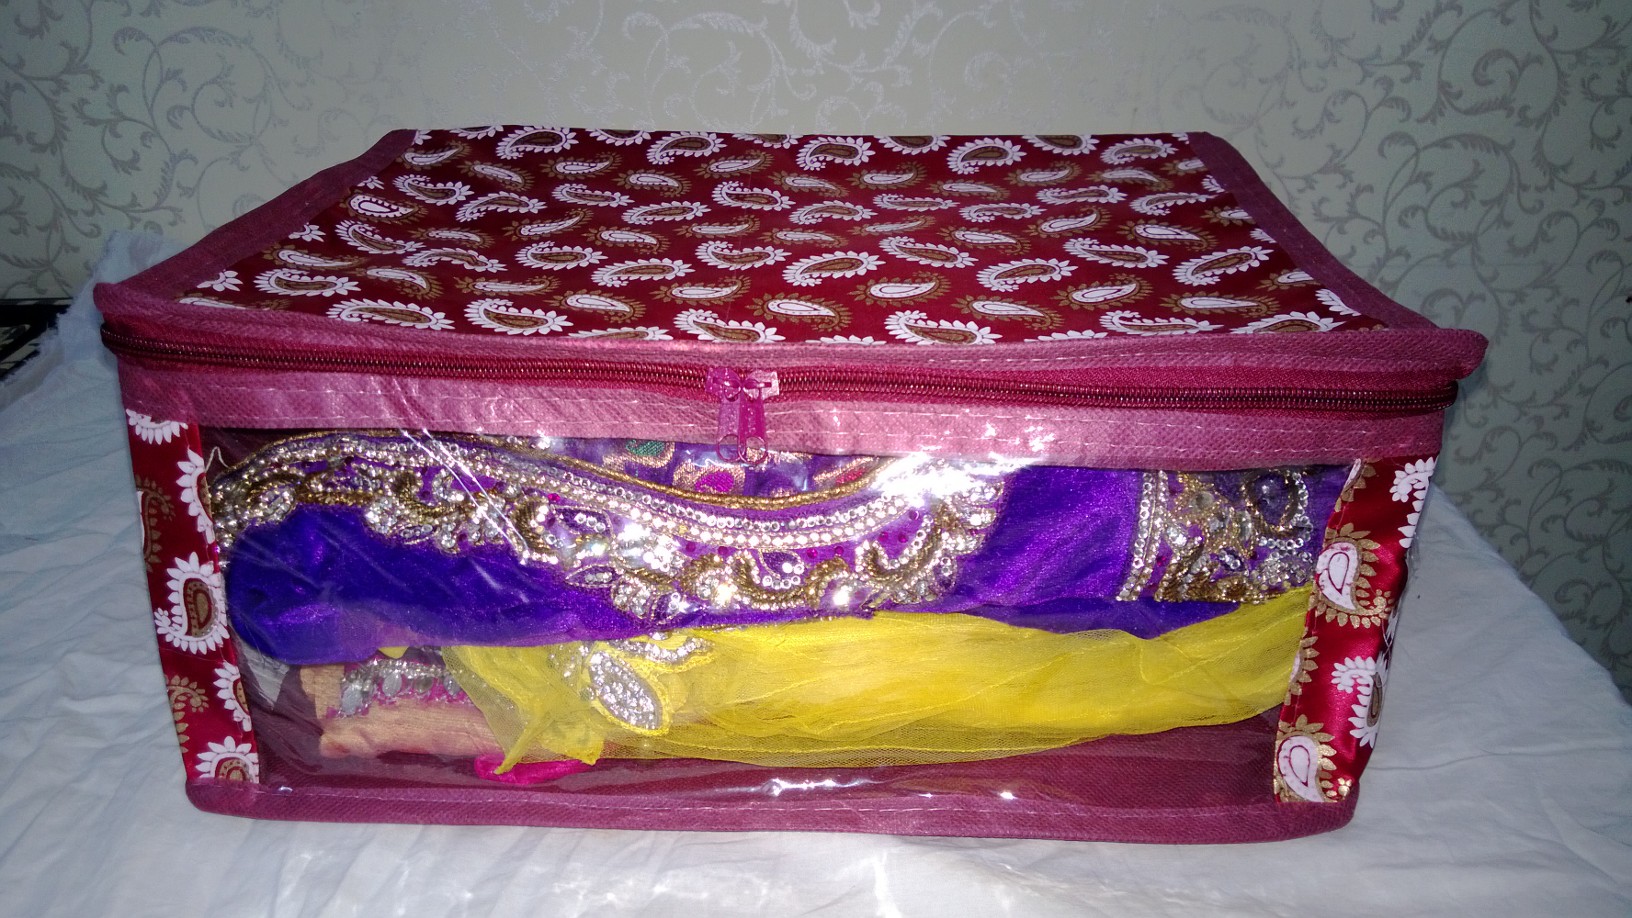 Online SAREE COVER / DRESS COVER MRP300/- 1pcs( storage . BAGS ) Prices - Shopclues India